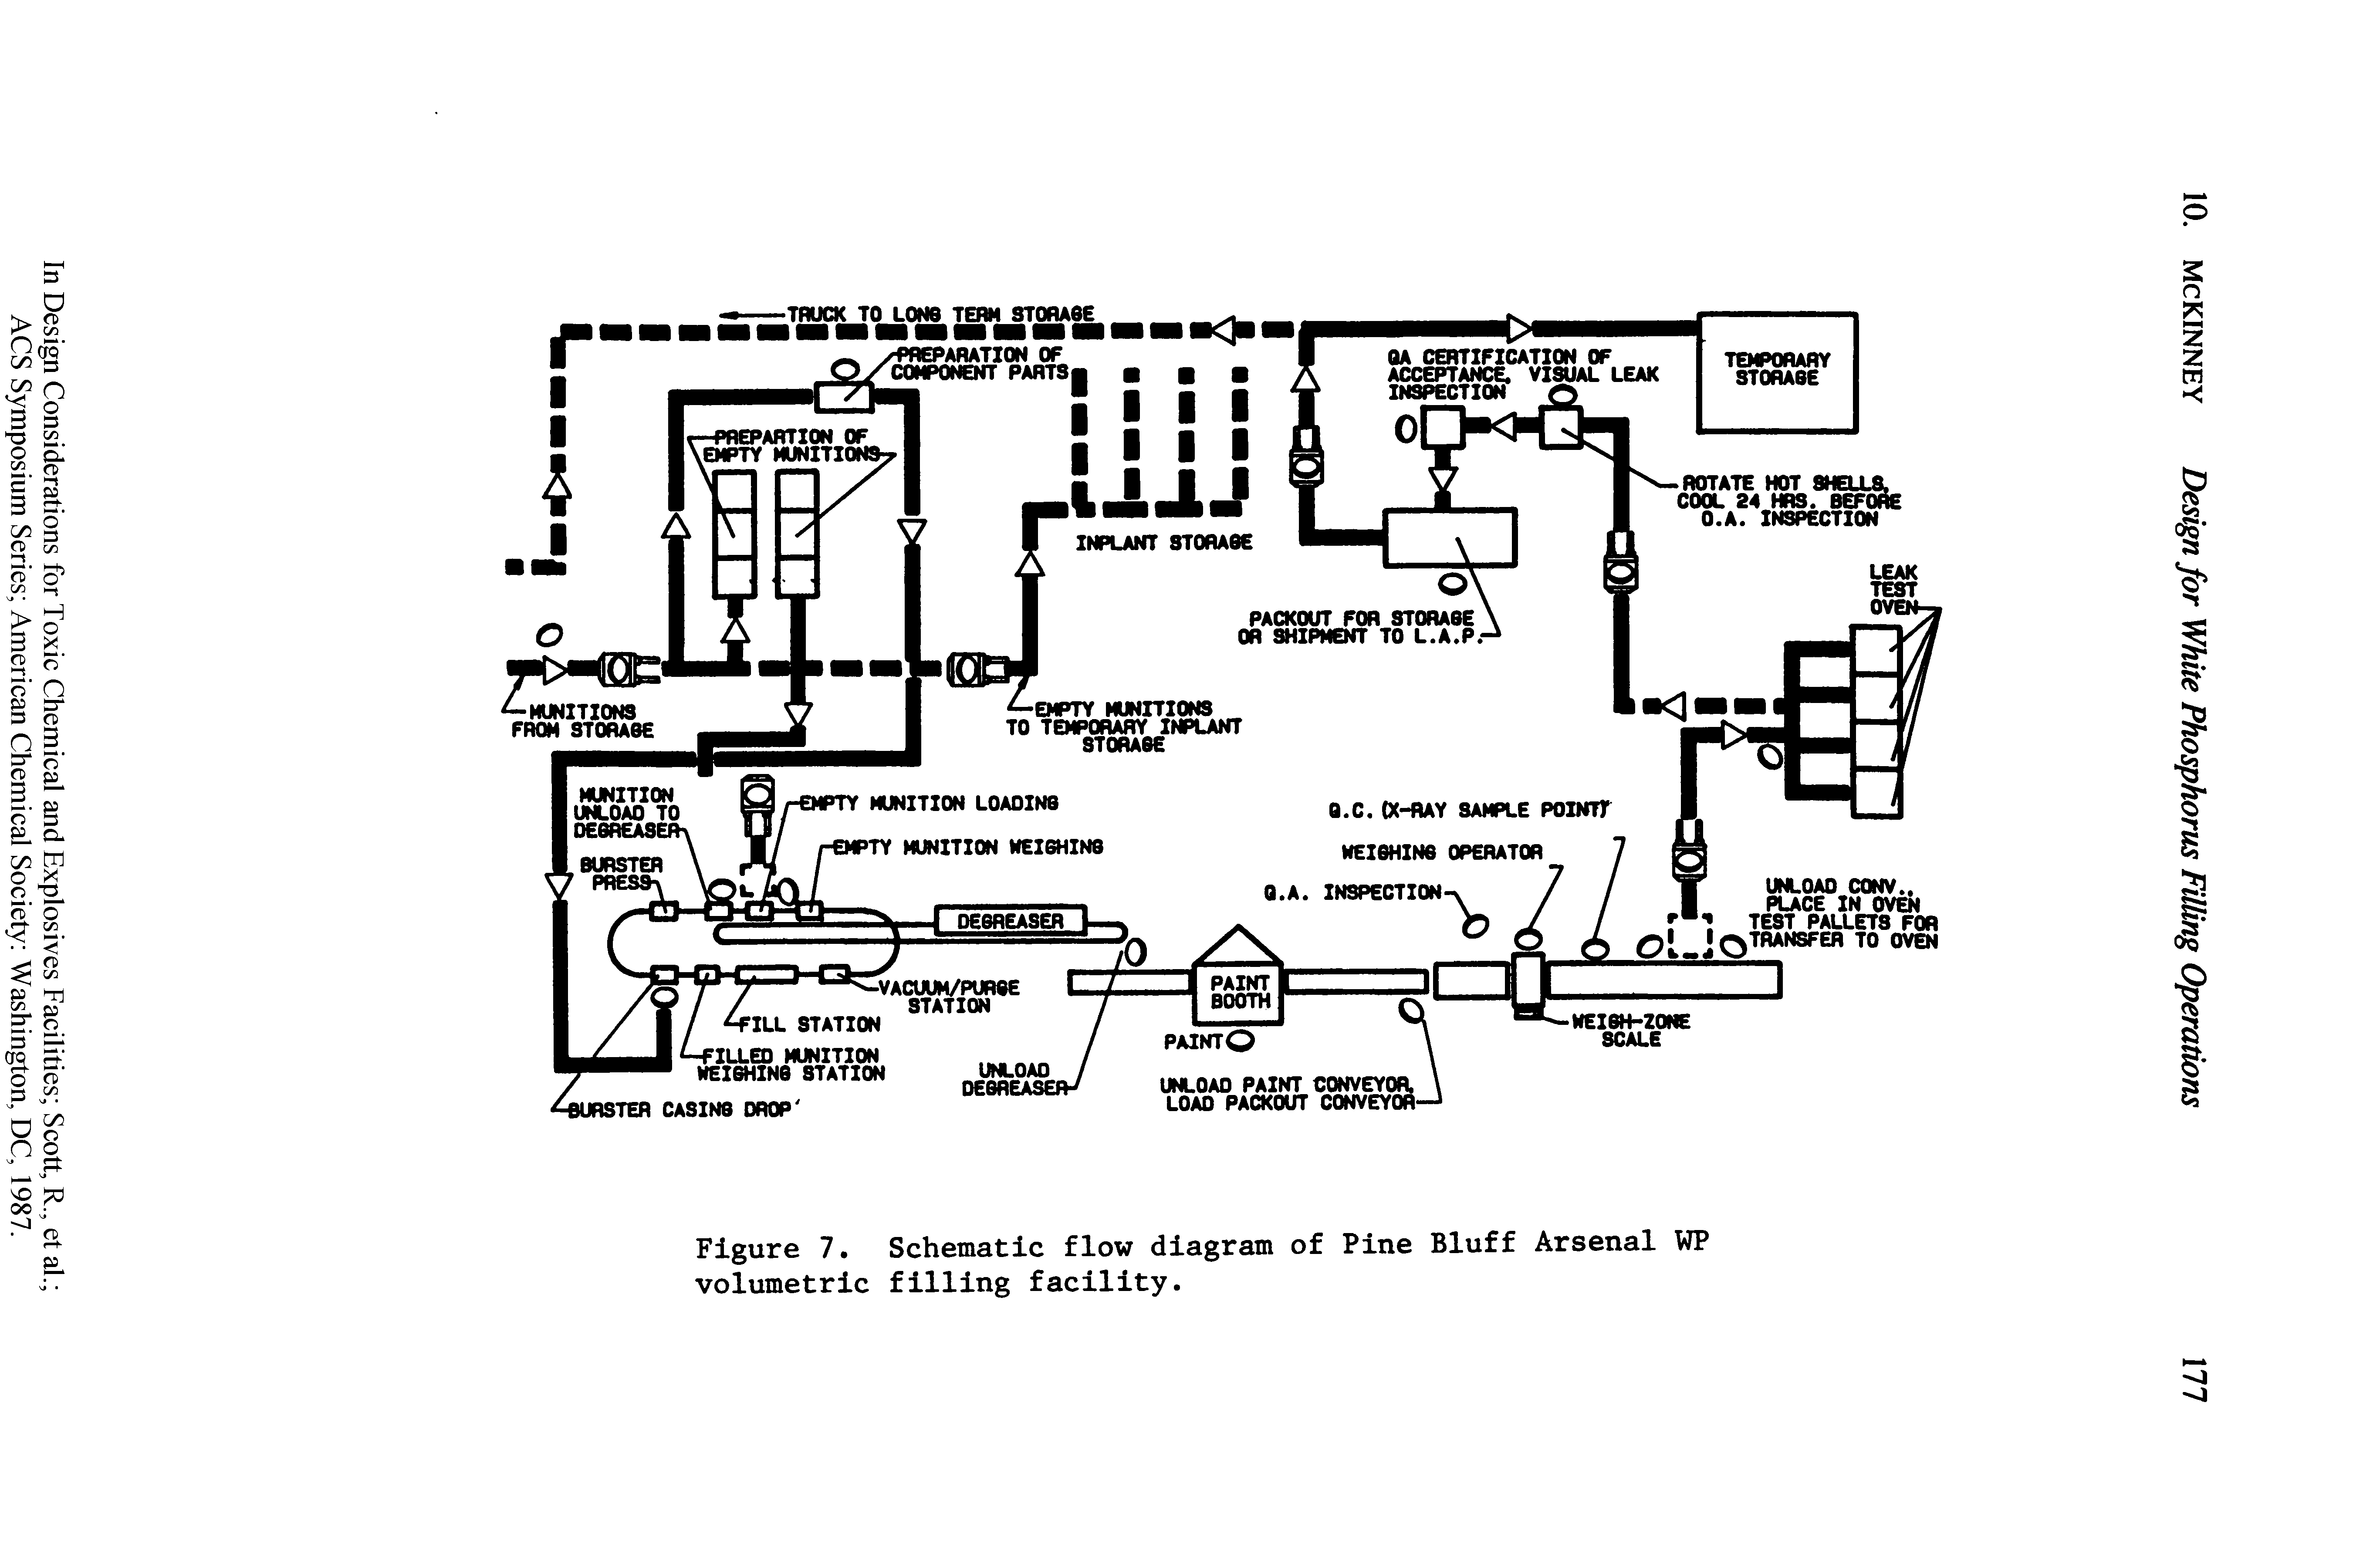 Figure 7. Schematic flow diagram of Pine Bluff Arsenal WP volumetric filling facility.